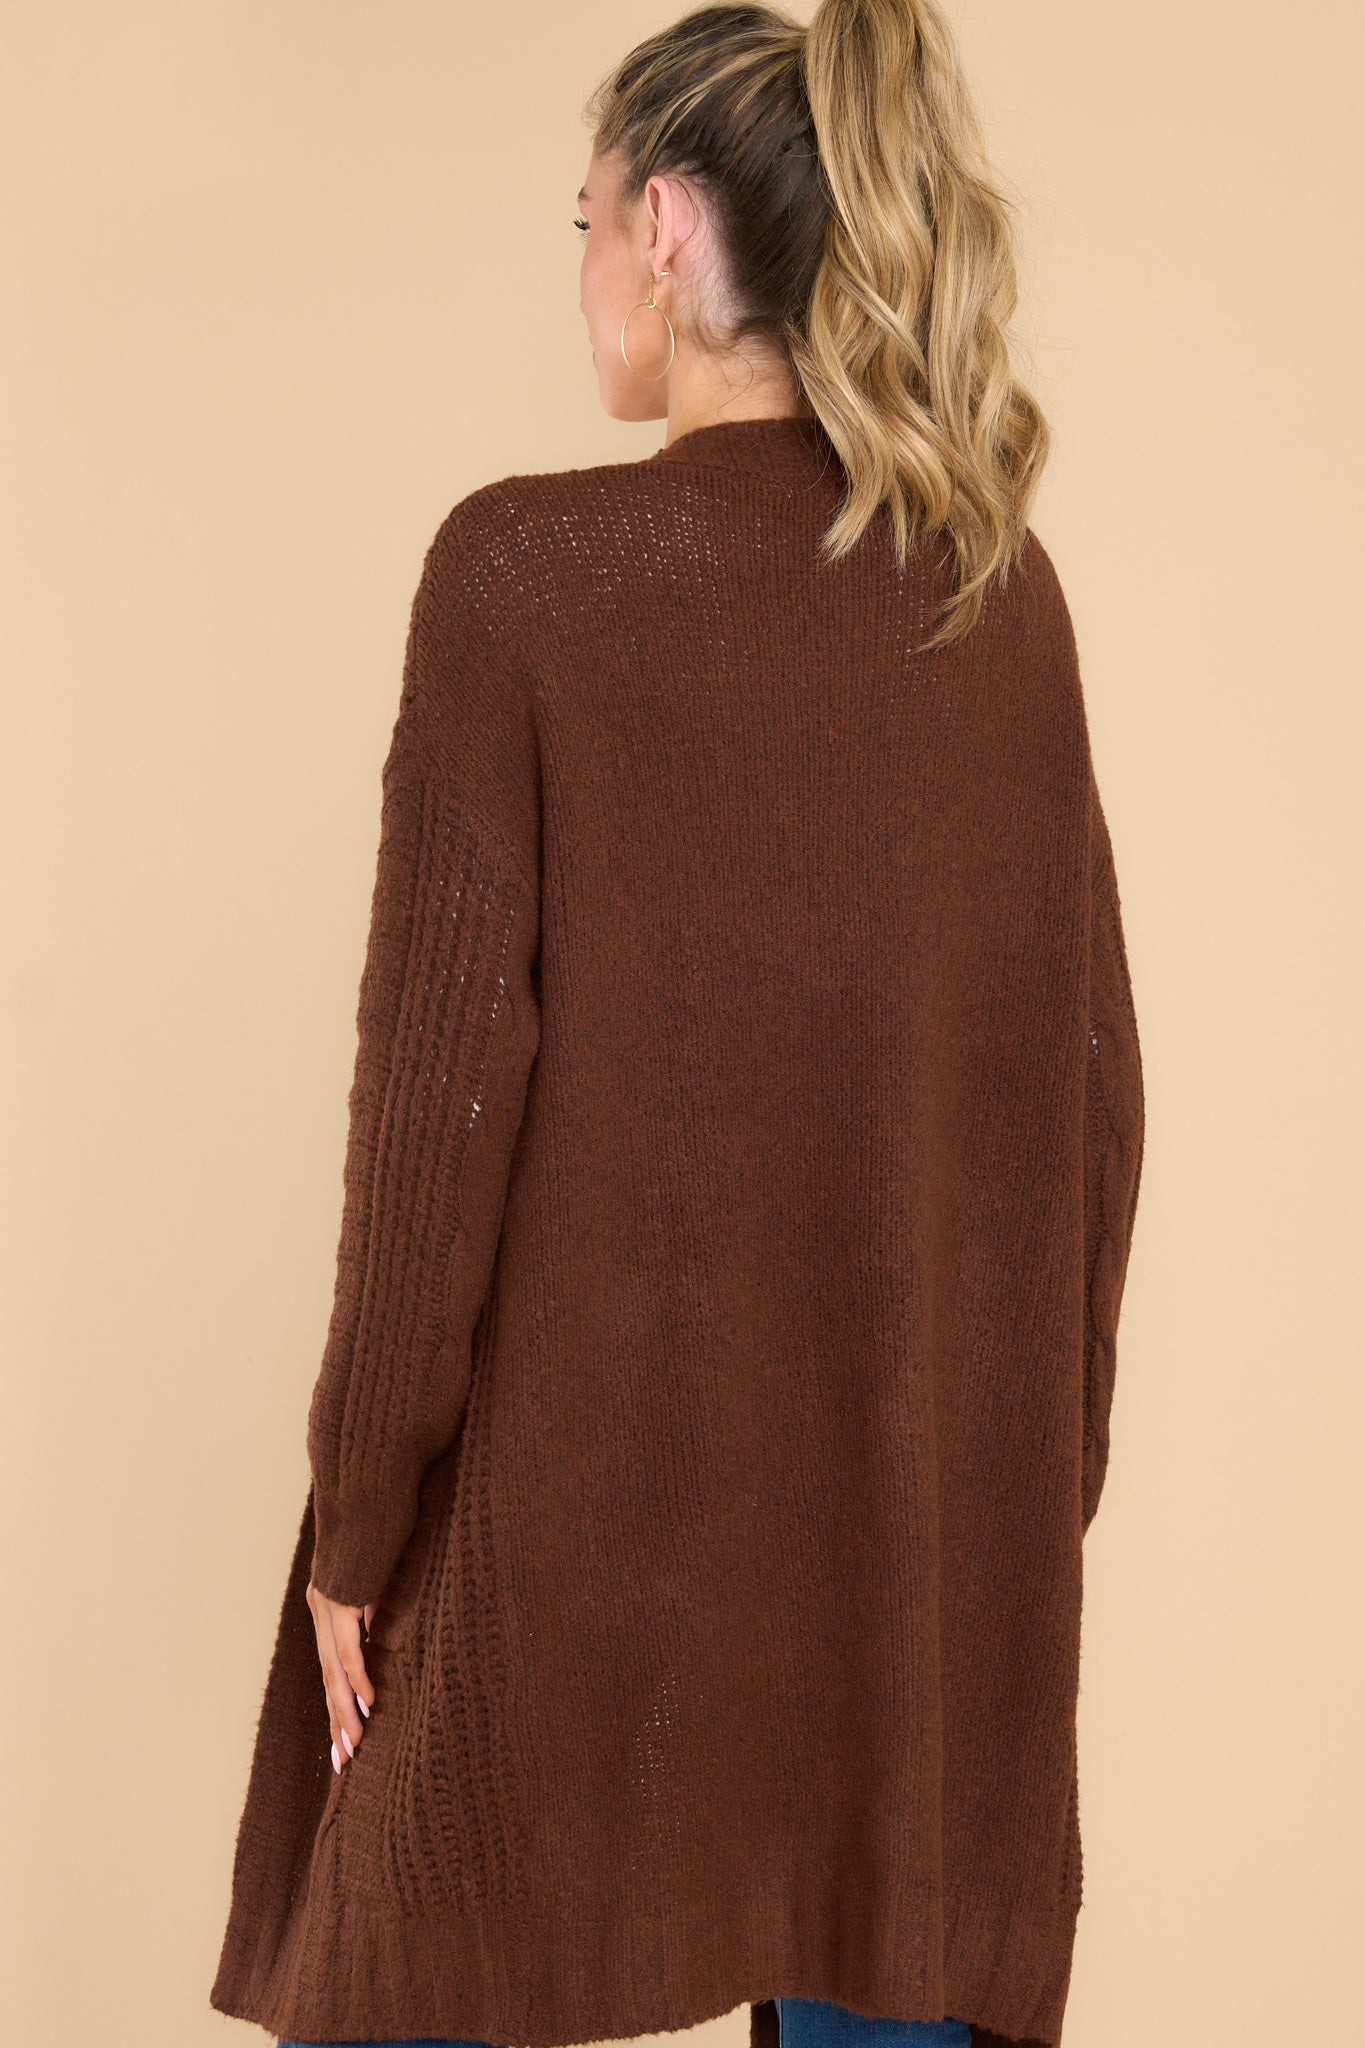 By The Fireplace Brown Cardigan - Red Dress